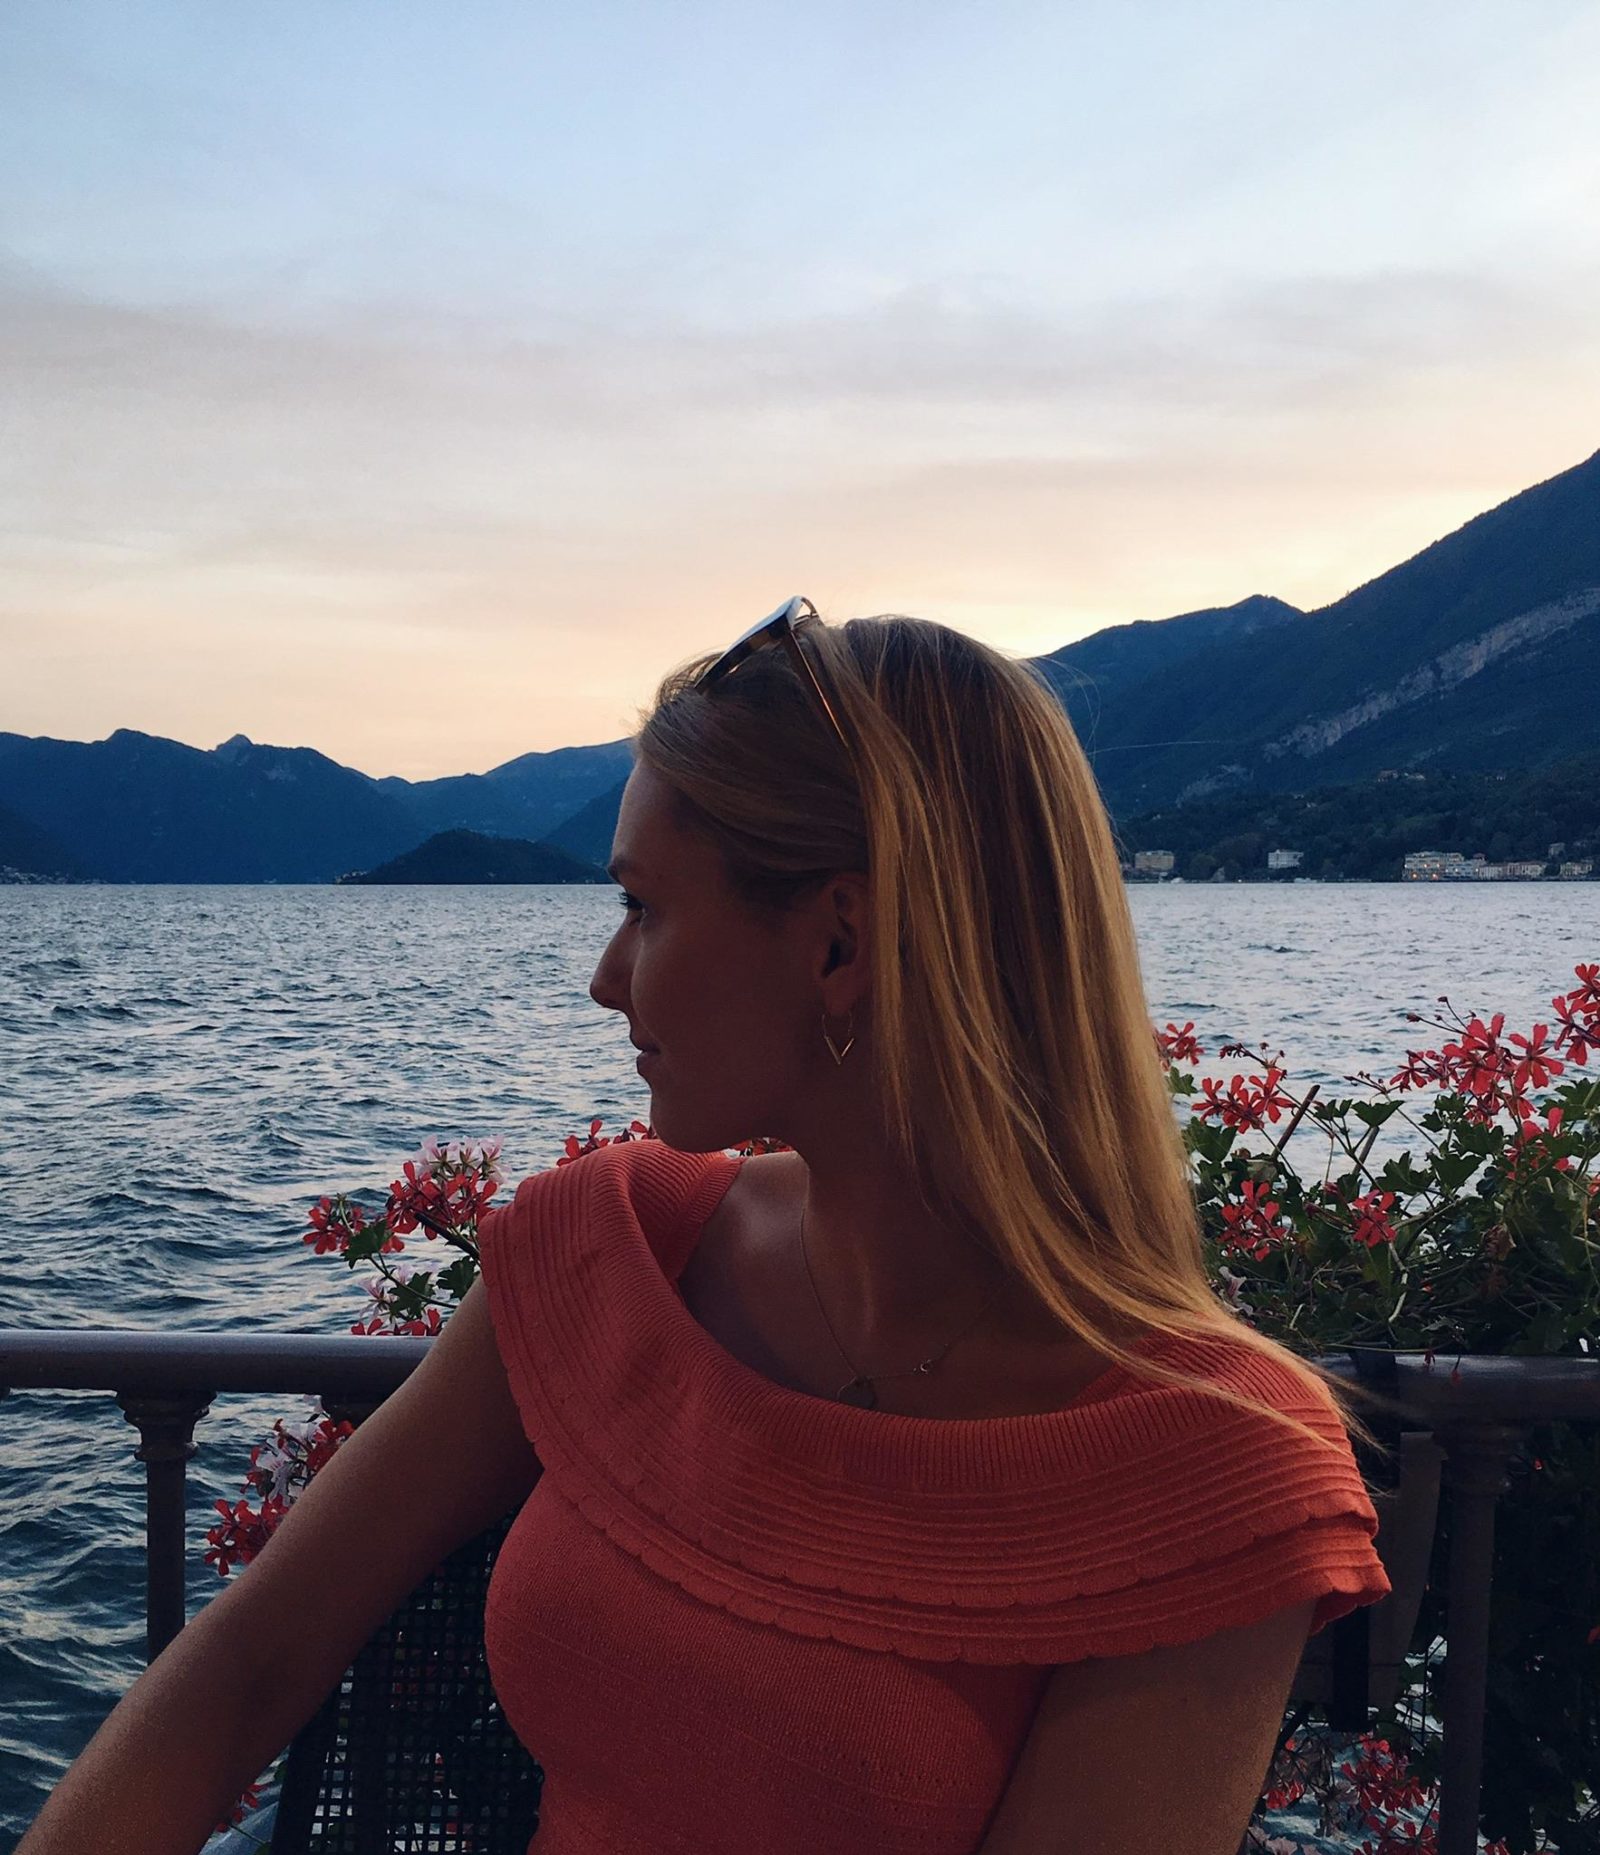 A Snap Shot of My Holiday #1 – Bellagio